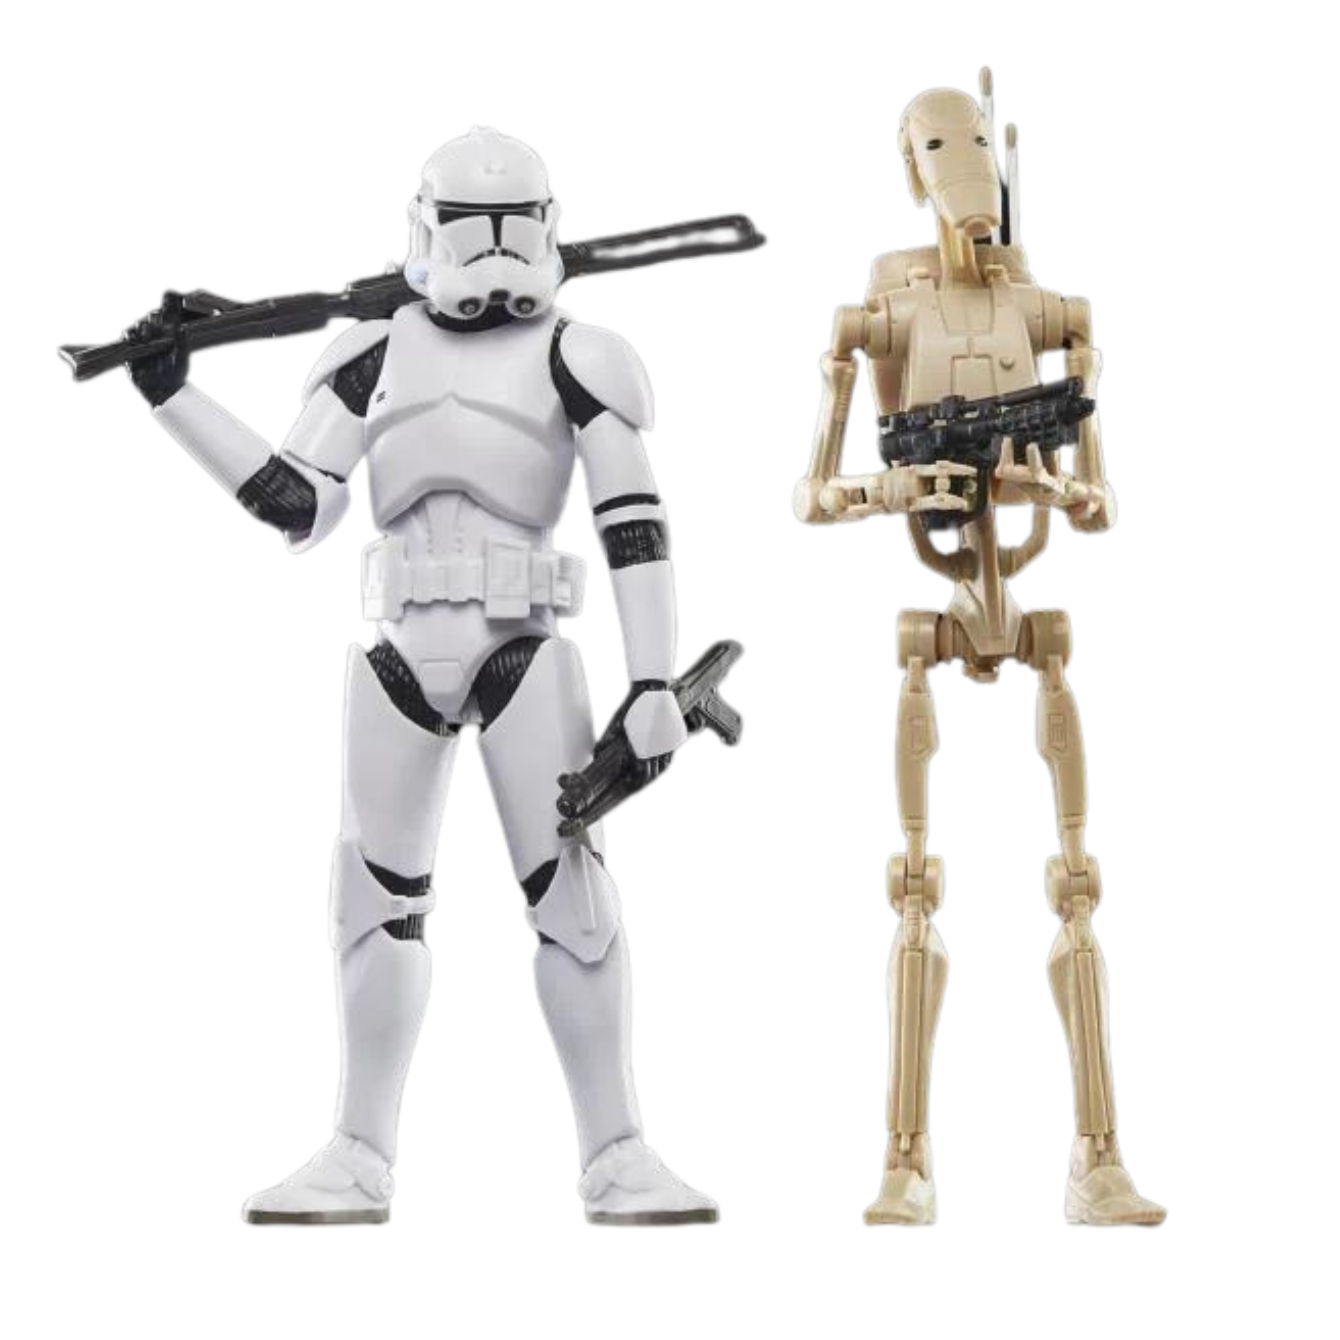 Star Wars: The Black Series 6" Phase II Clone Trooper & Battle Droid Two-Pack (The Clone Wars)